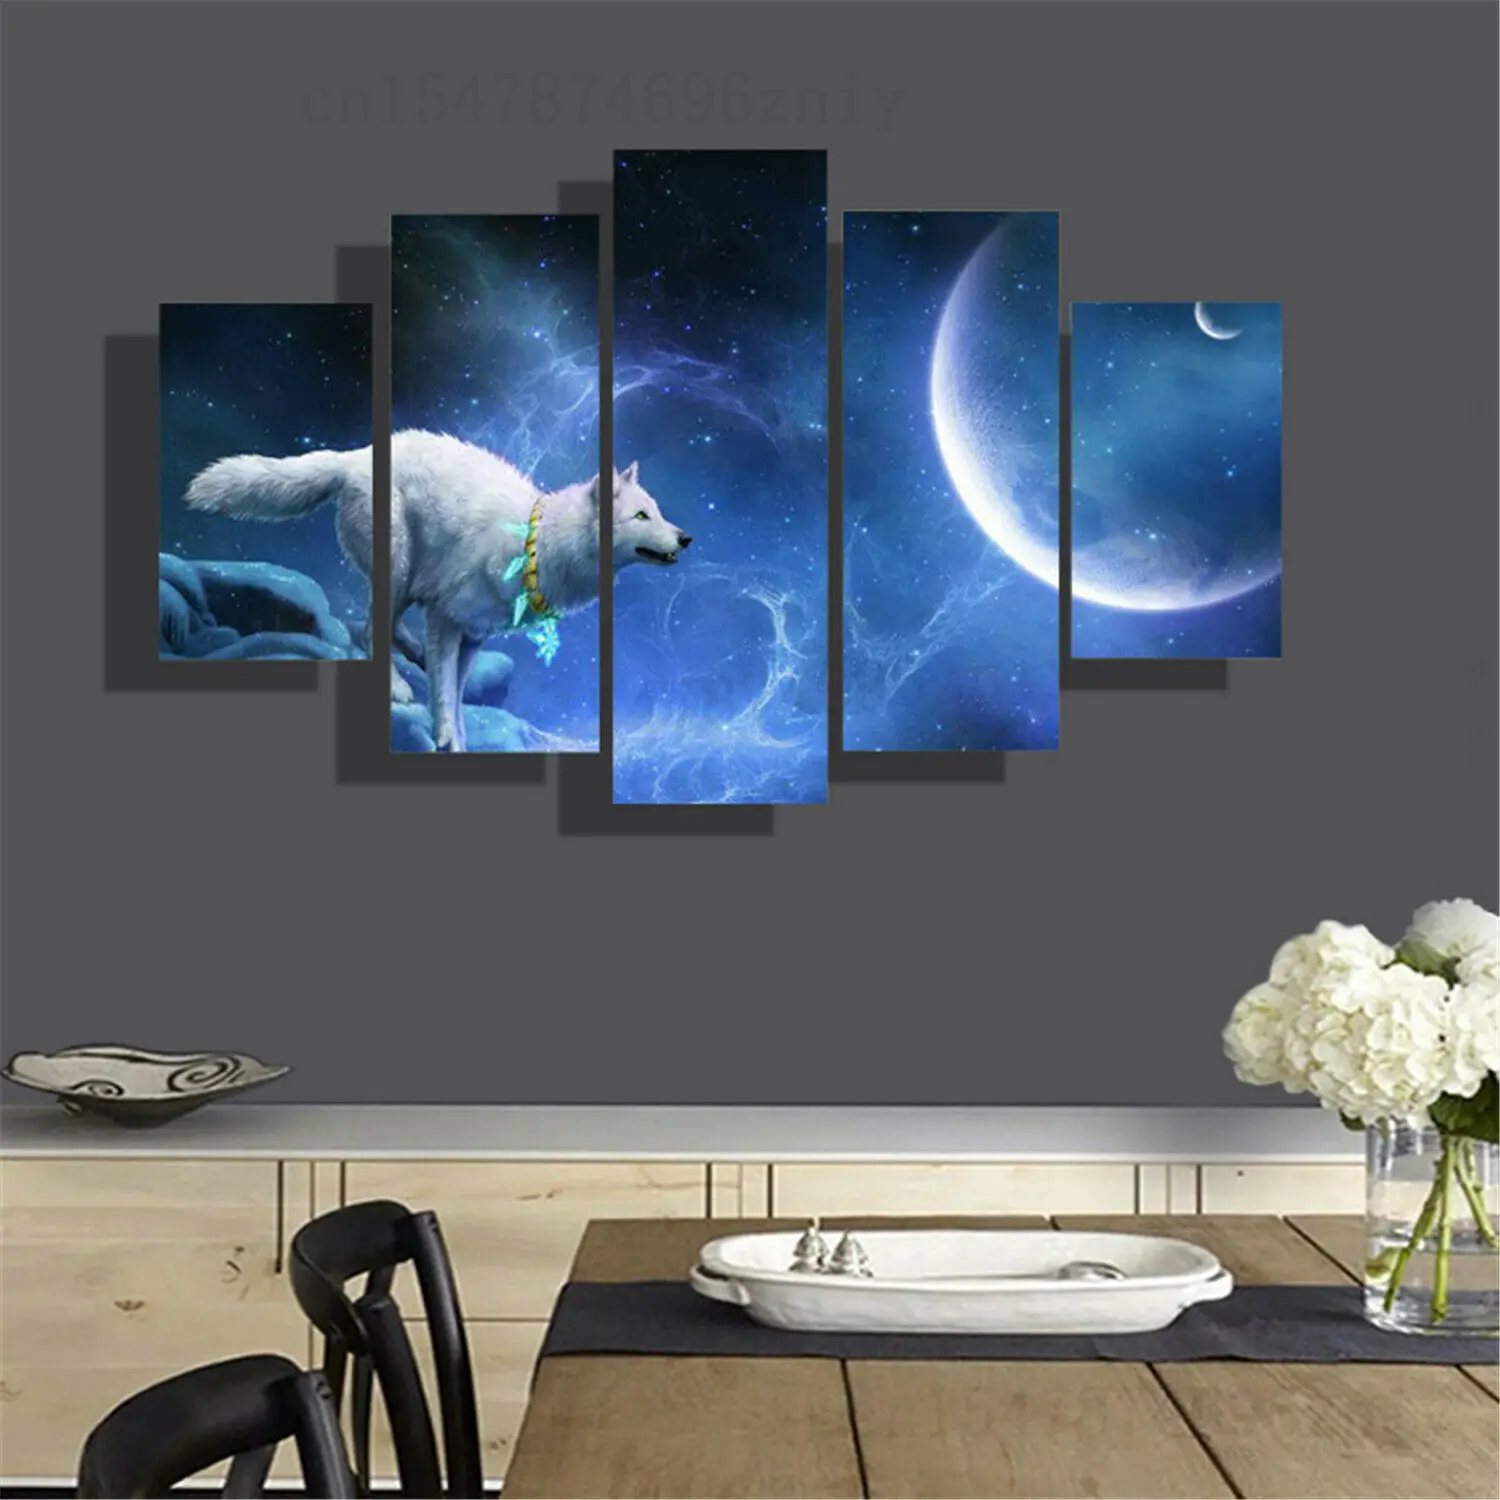 

5 Pieces HD Print Canvas Wall Art Poster Living Room Ice Wolf Room Decor Pictures Paintings Home Decor 5 Panel No Framed